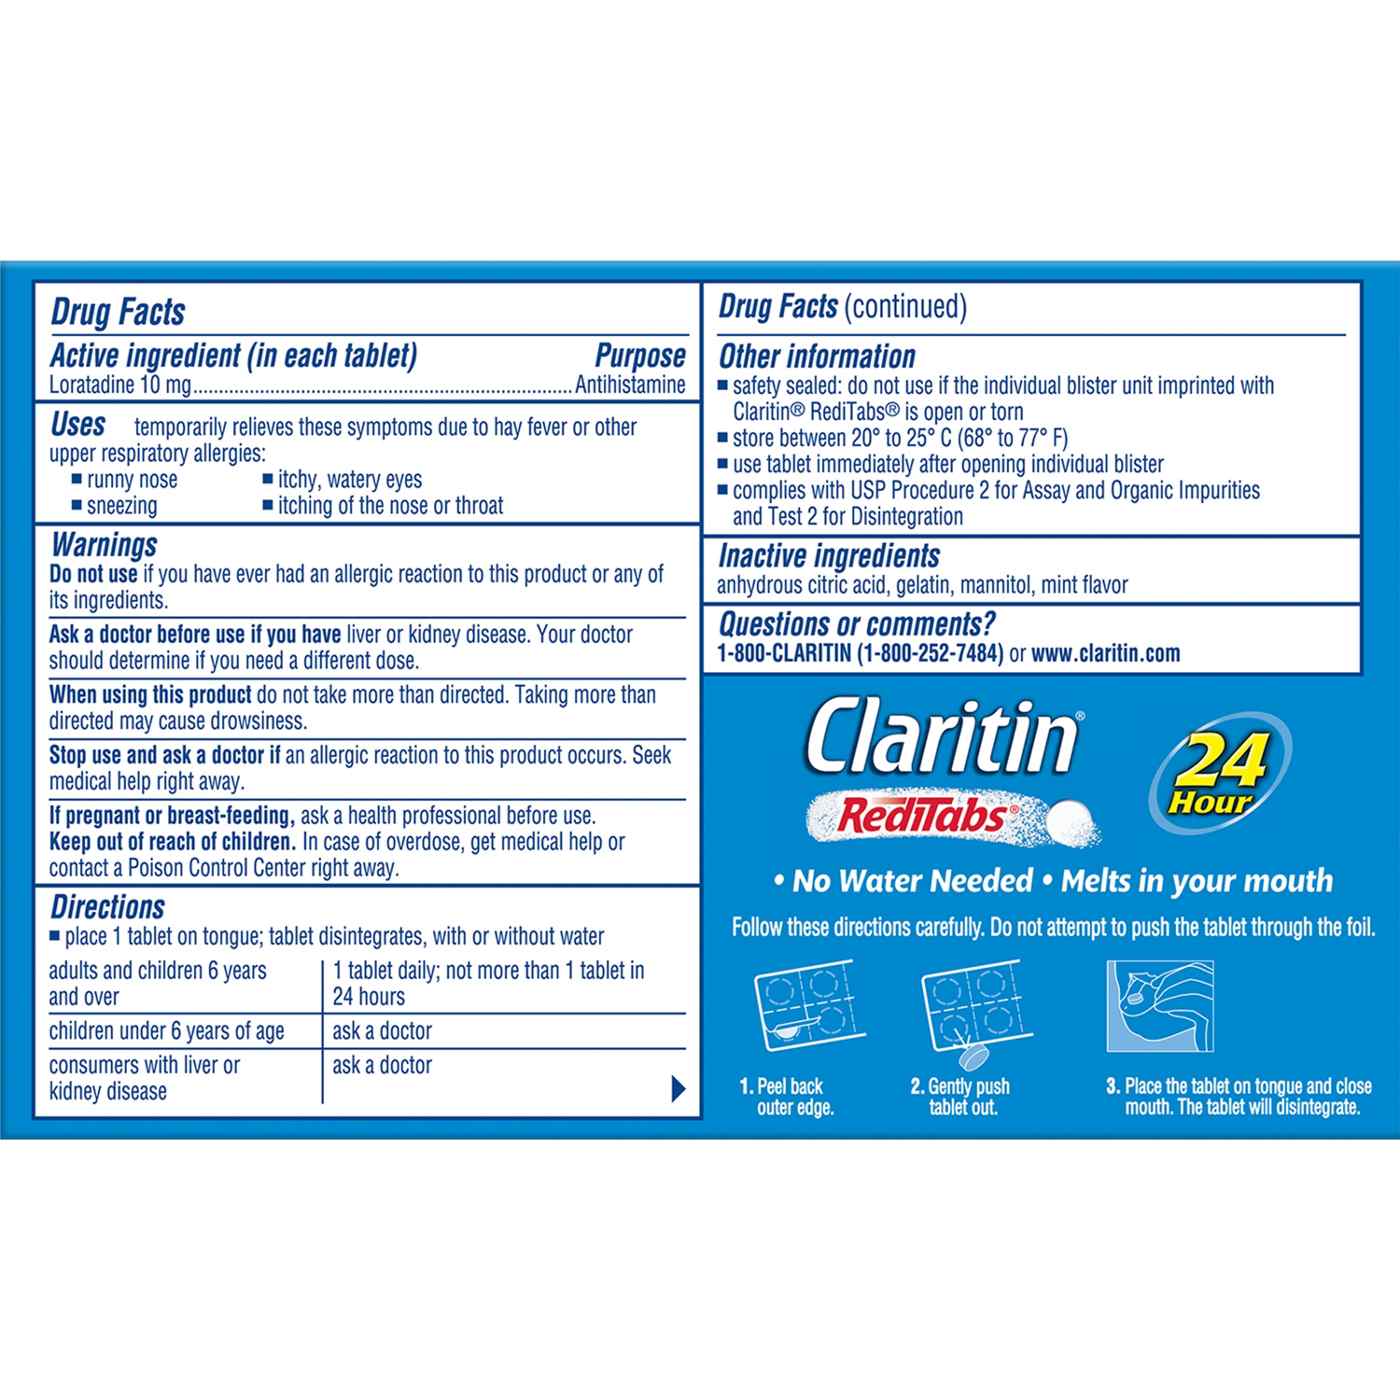 Claritin RediTabs 24 Hour Allergy Relief Tablets; image 2 of 2